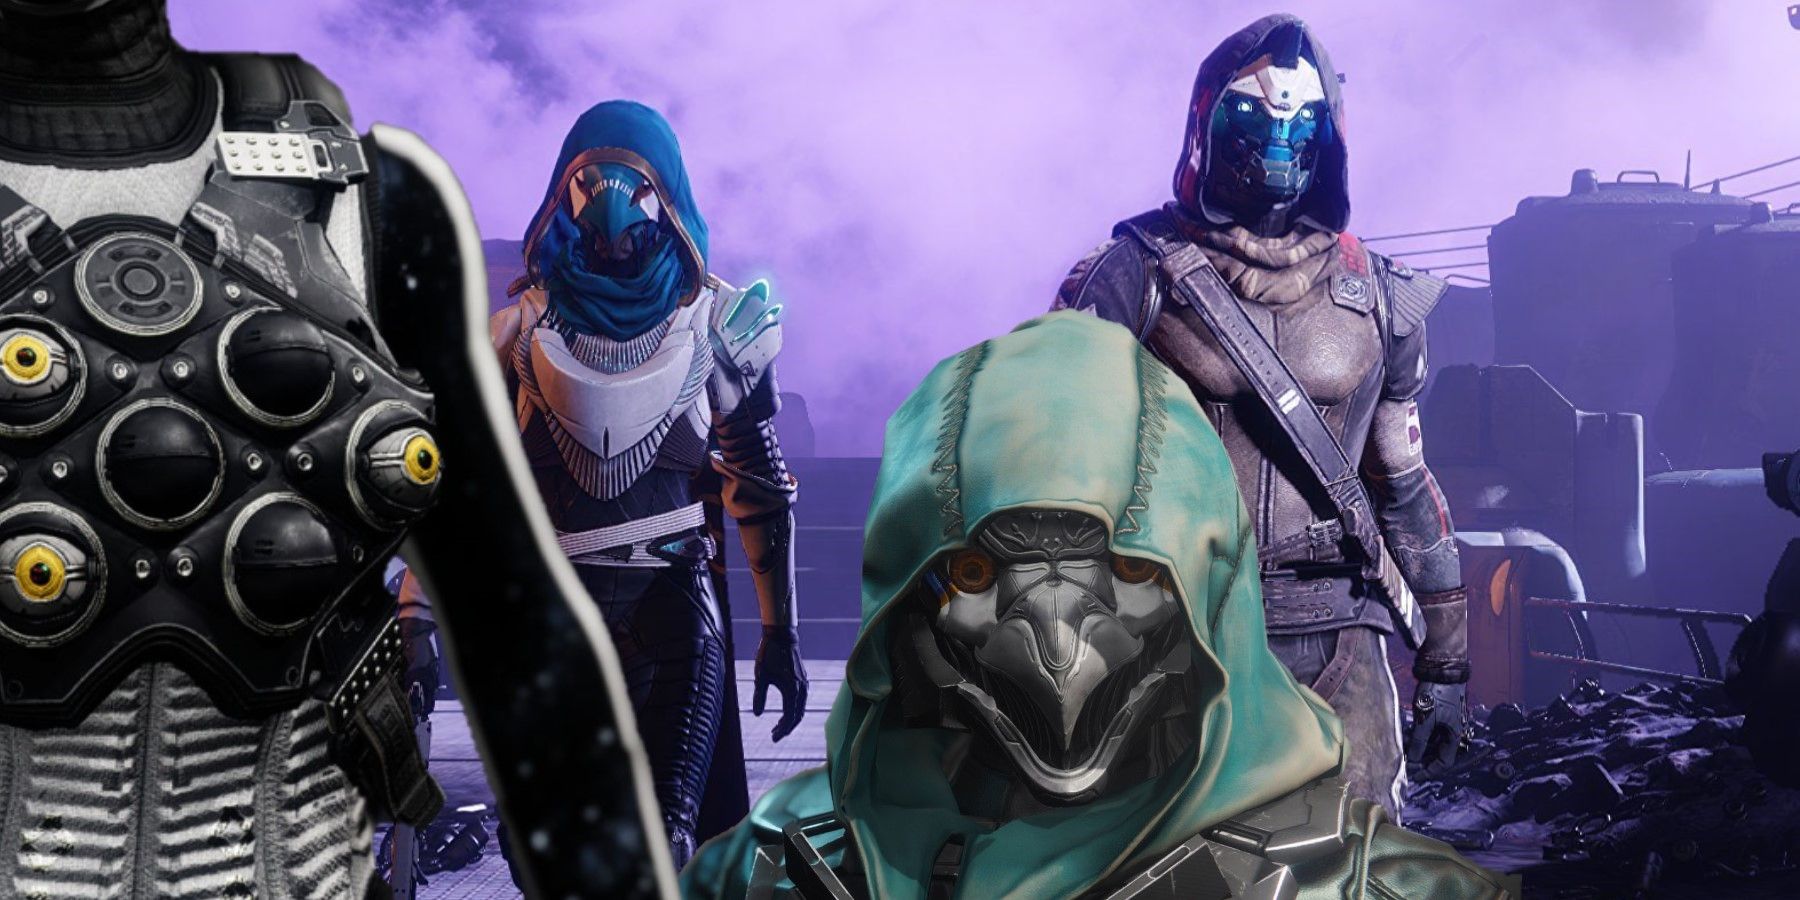 destiny 2 hunters worst class pve 30th anniversary pack nerfs warlock well of radiance focusing lense divinity role celestial nighthawk outperformed thundercrash omnioculus void tether weaken